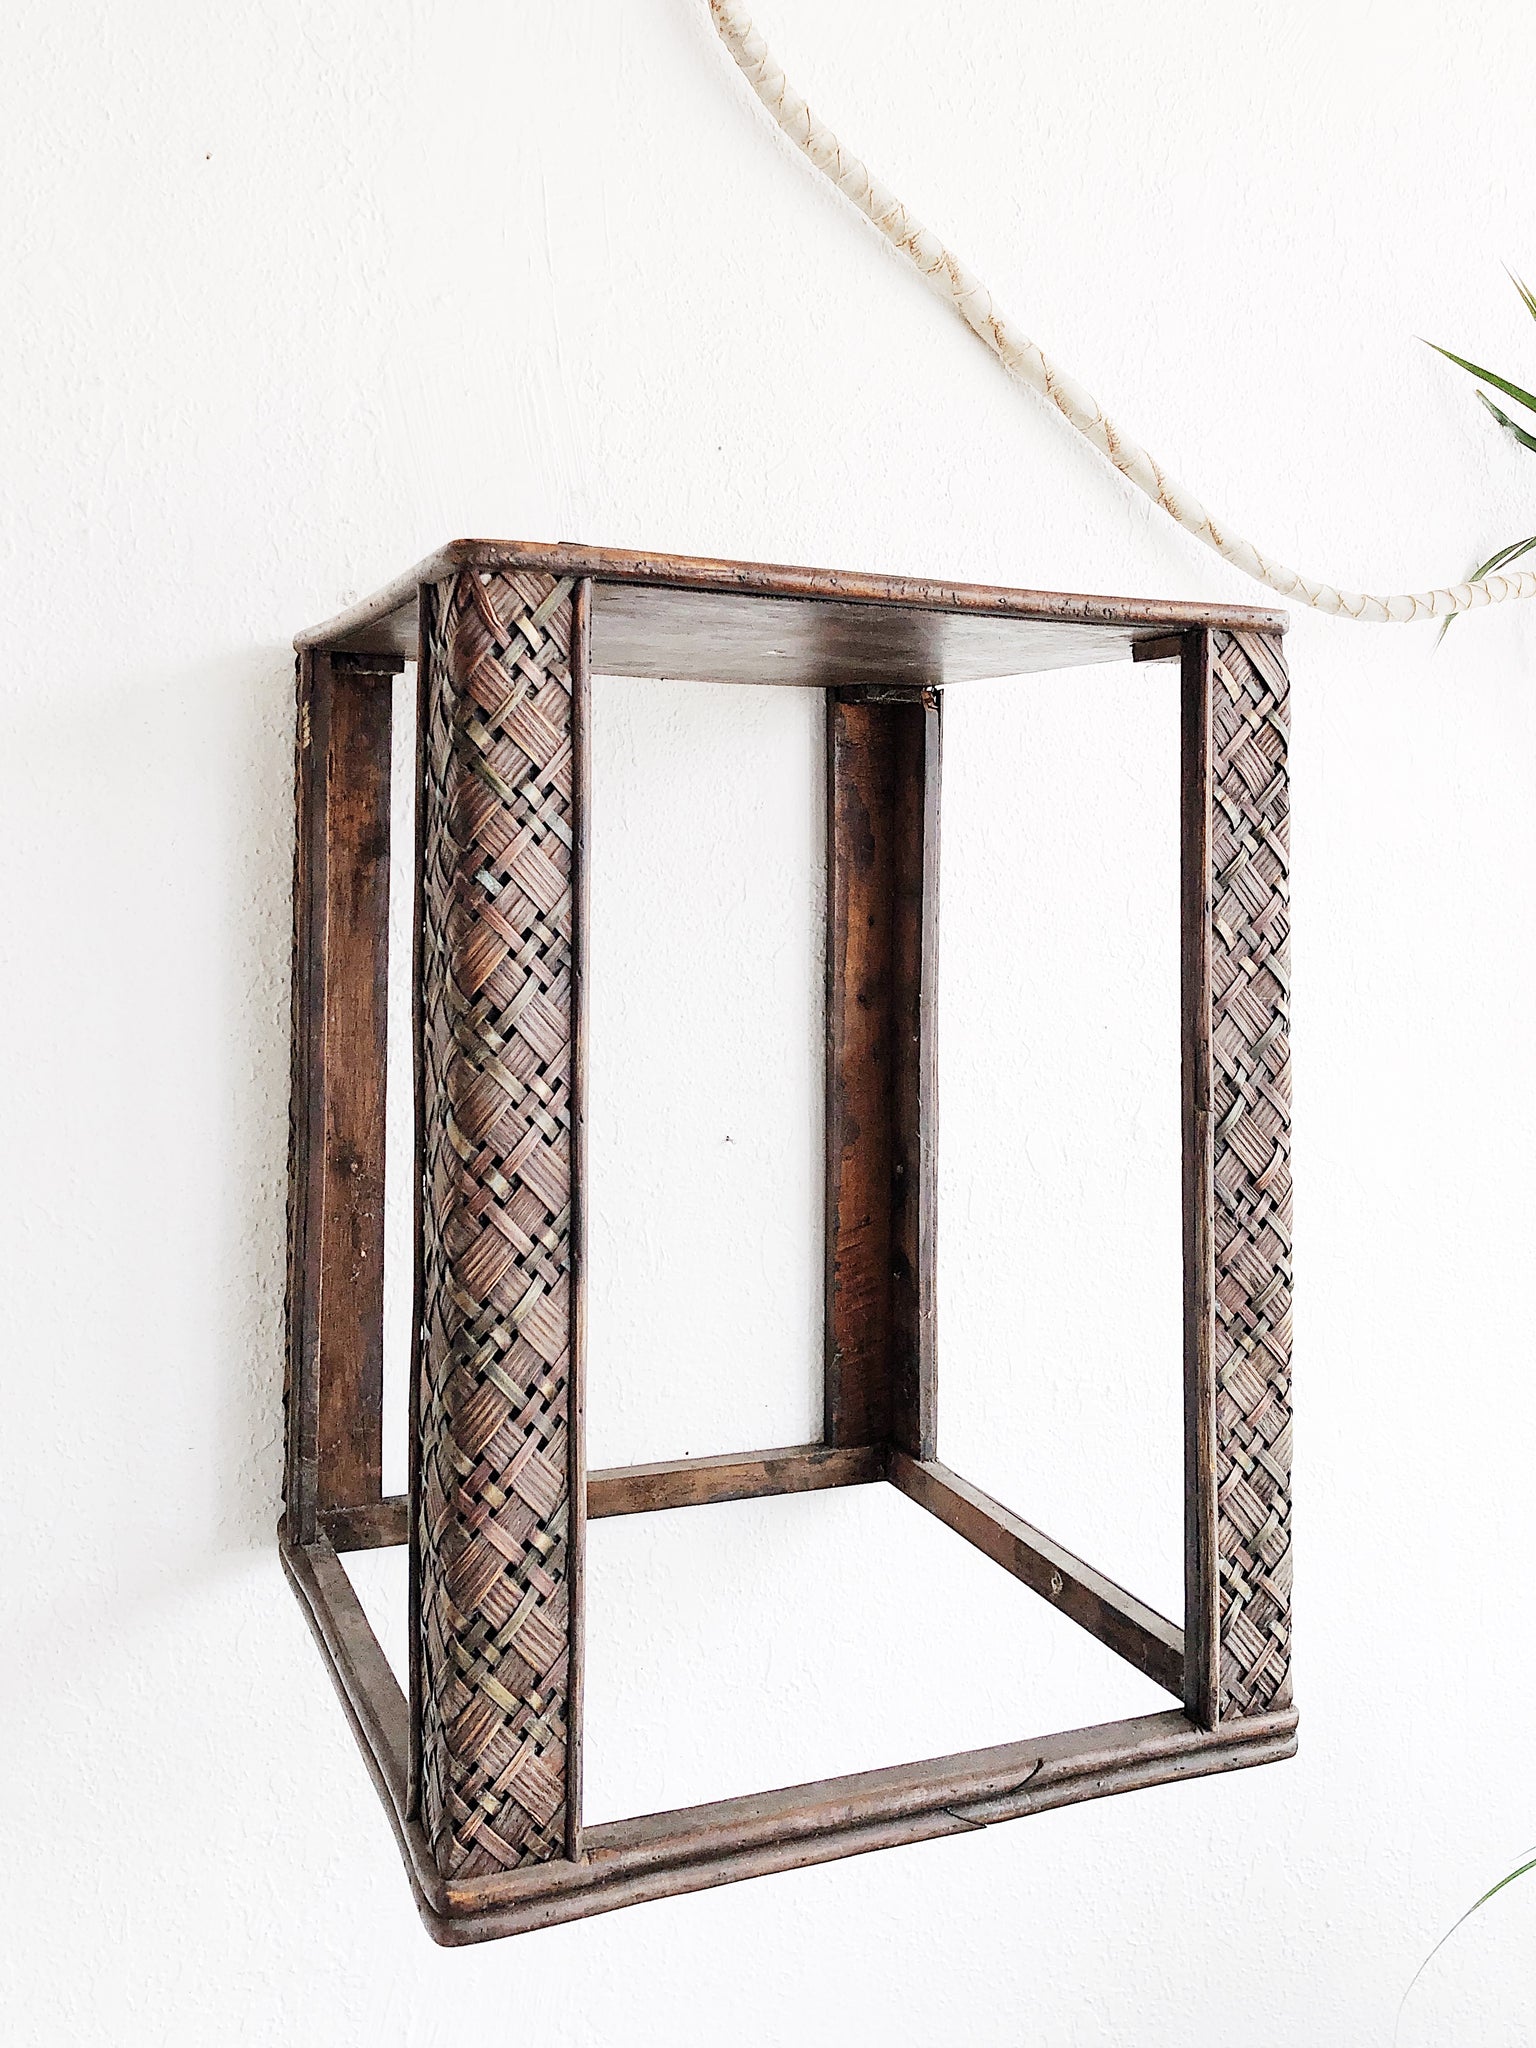 Vintage Woven Side Table